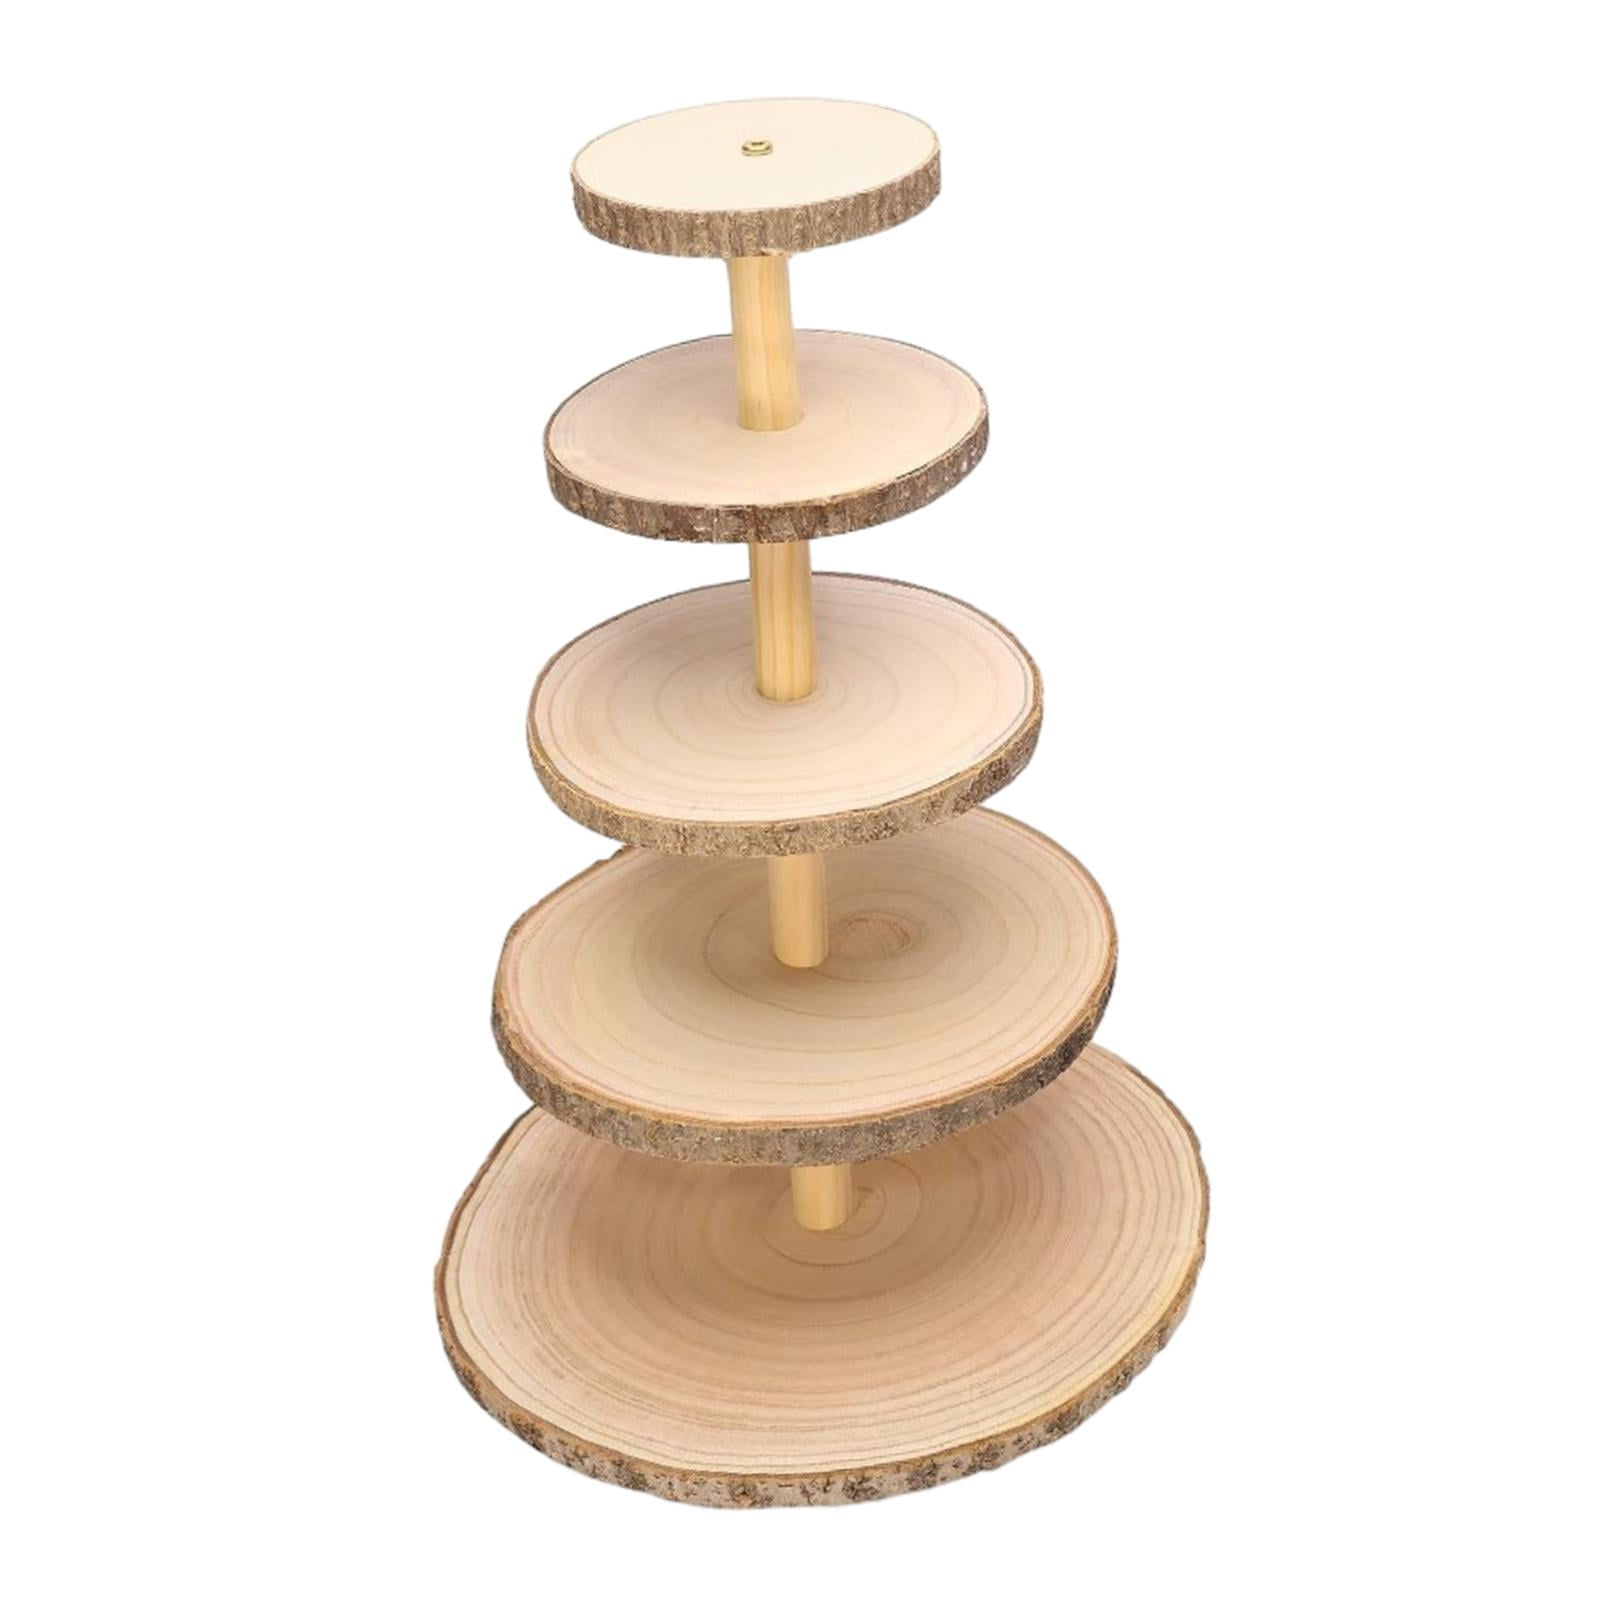 Wooden Display Stand Wood Cupcake Stands Tool Free, Rustic Risers